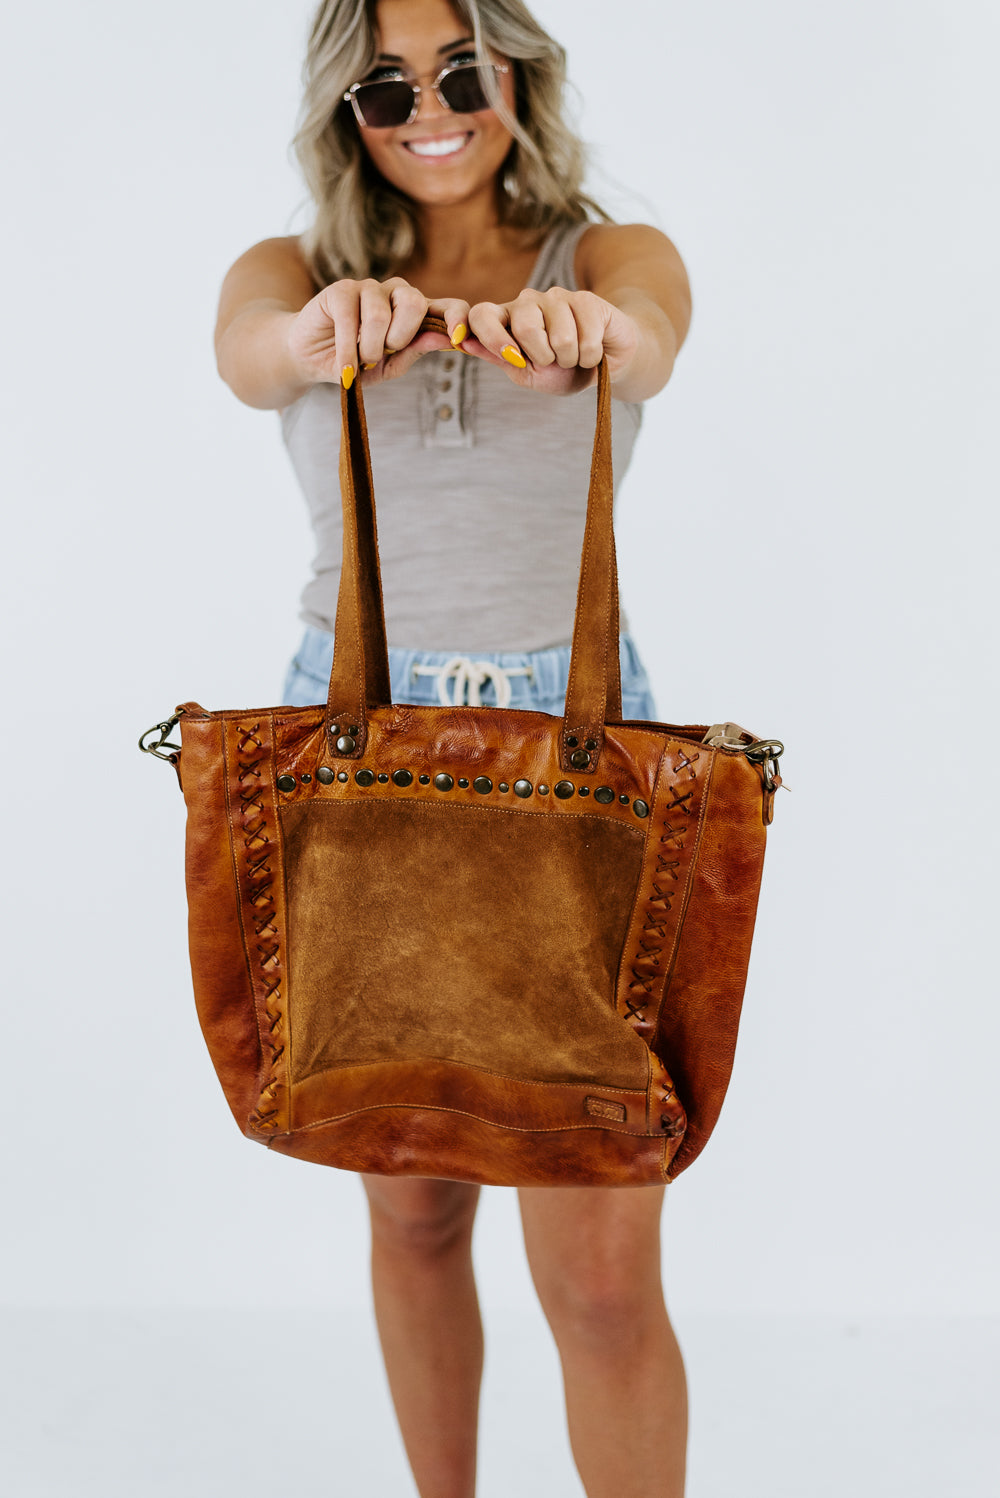 Go Forth Goods Leather Bucket Bag - Large - Rustic Pecan